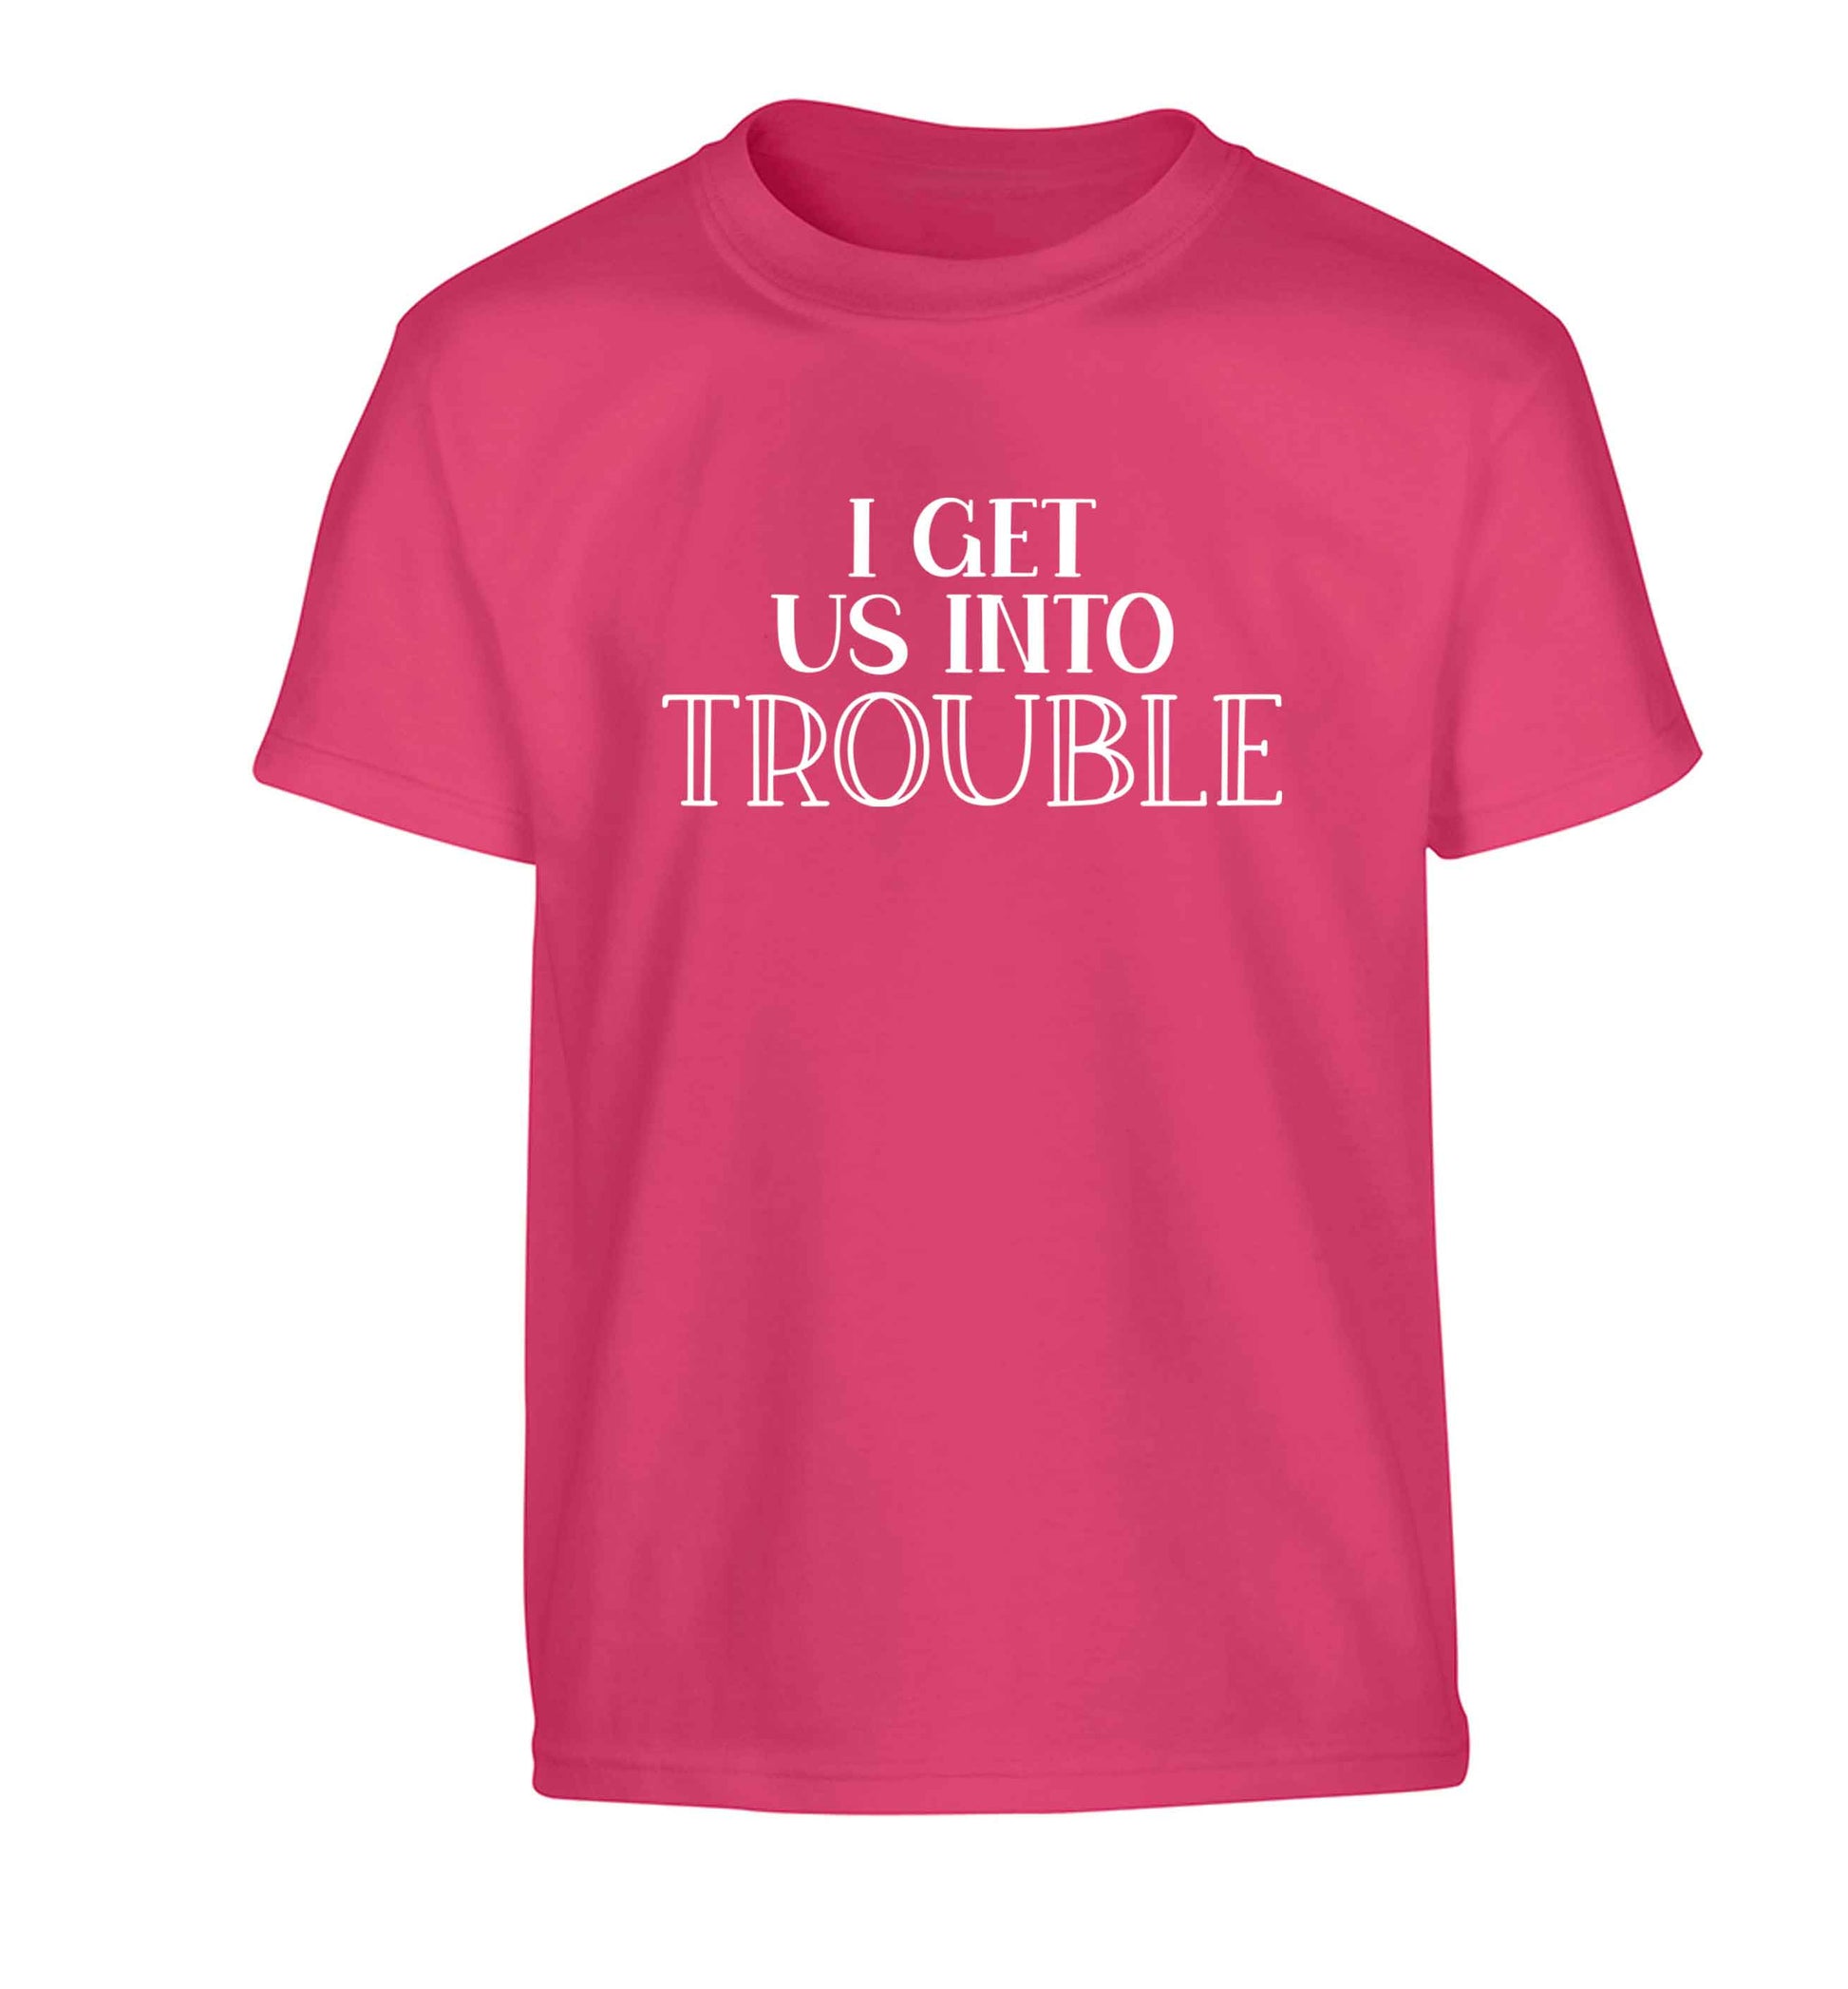 I get us into trouble Children's pink Tshirt 12-13 Years